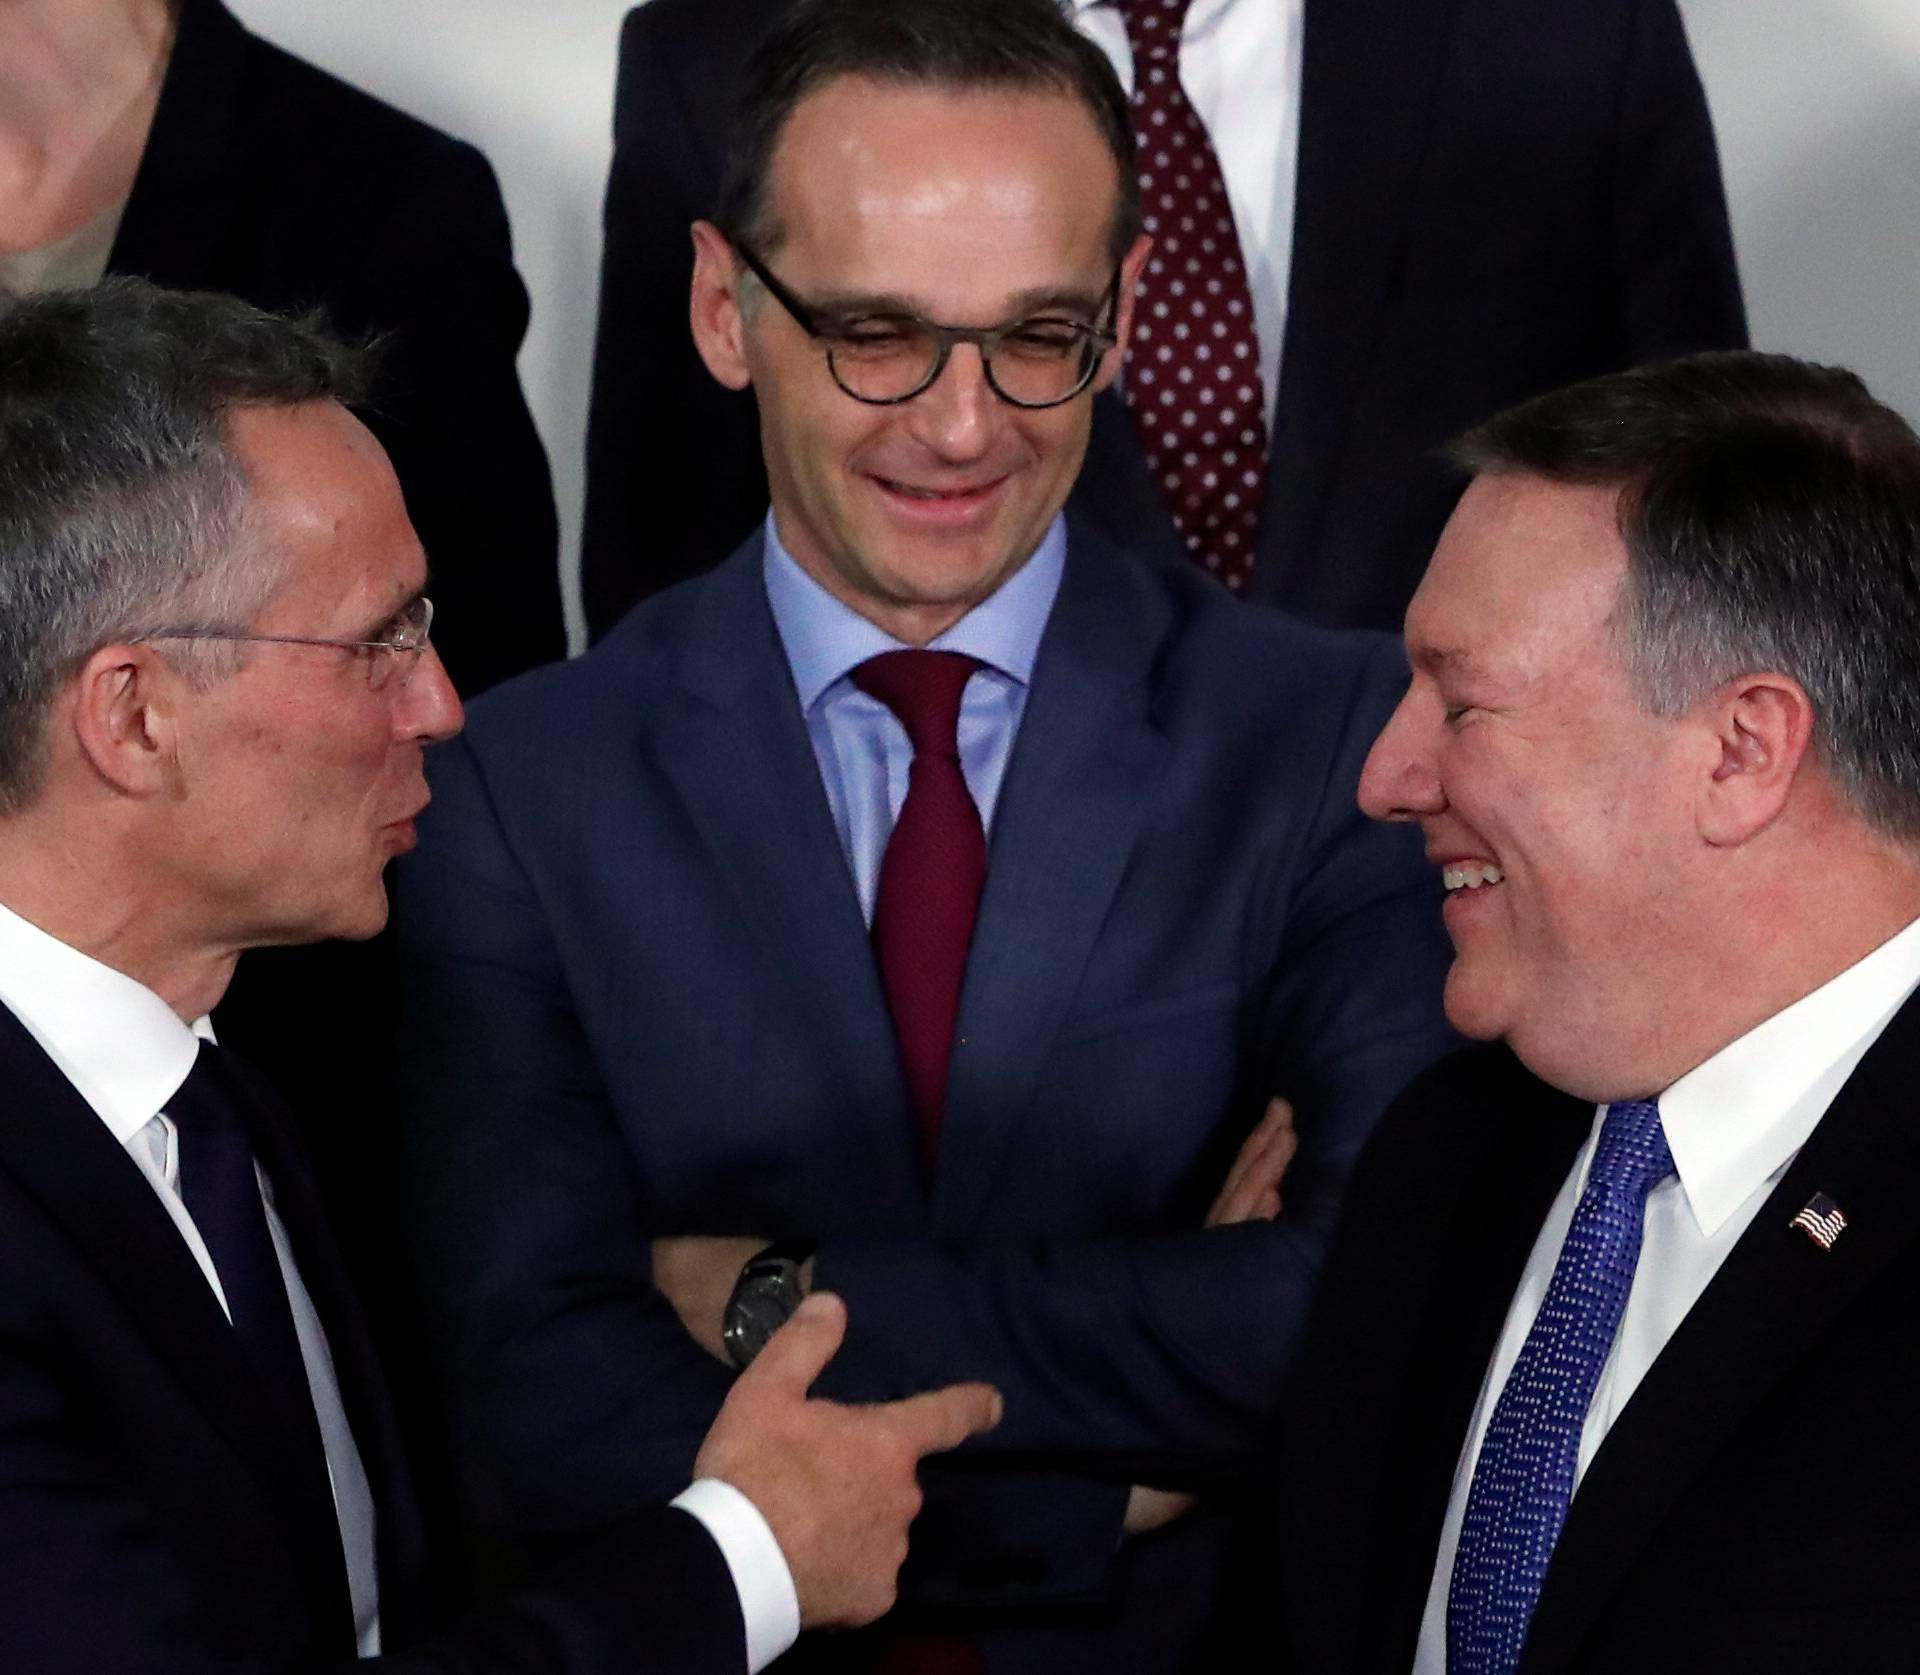 NATO Secretary General Stoltenberg, German Foreign Minister Maas and U.S. Secretary of State Pompeo attend a NATO foreign ministers meeting at the Alliance's headquarters in Brussels